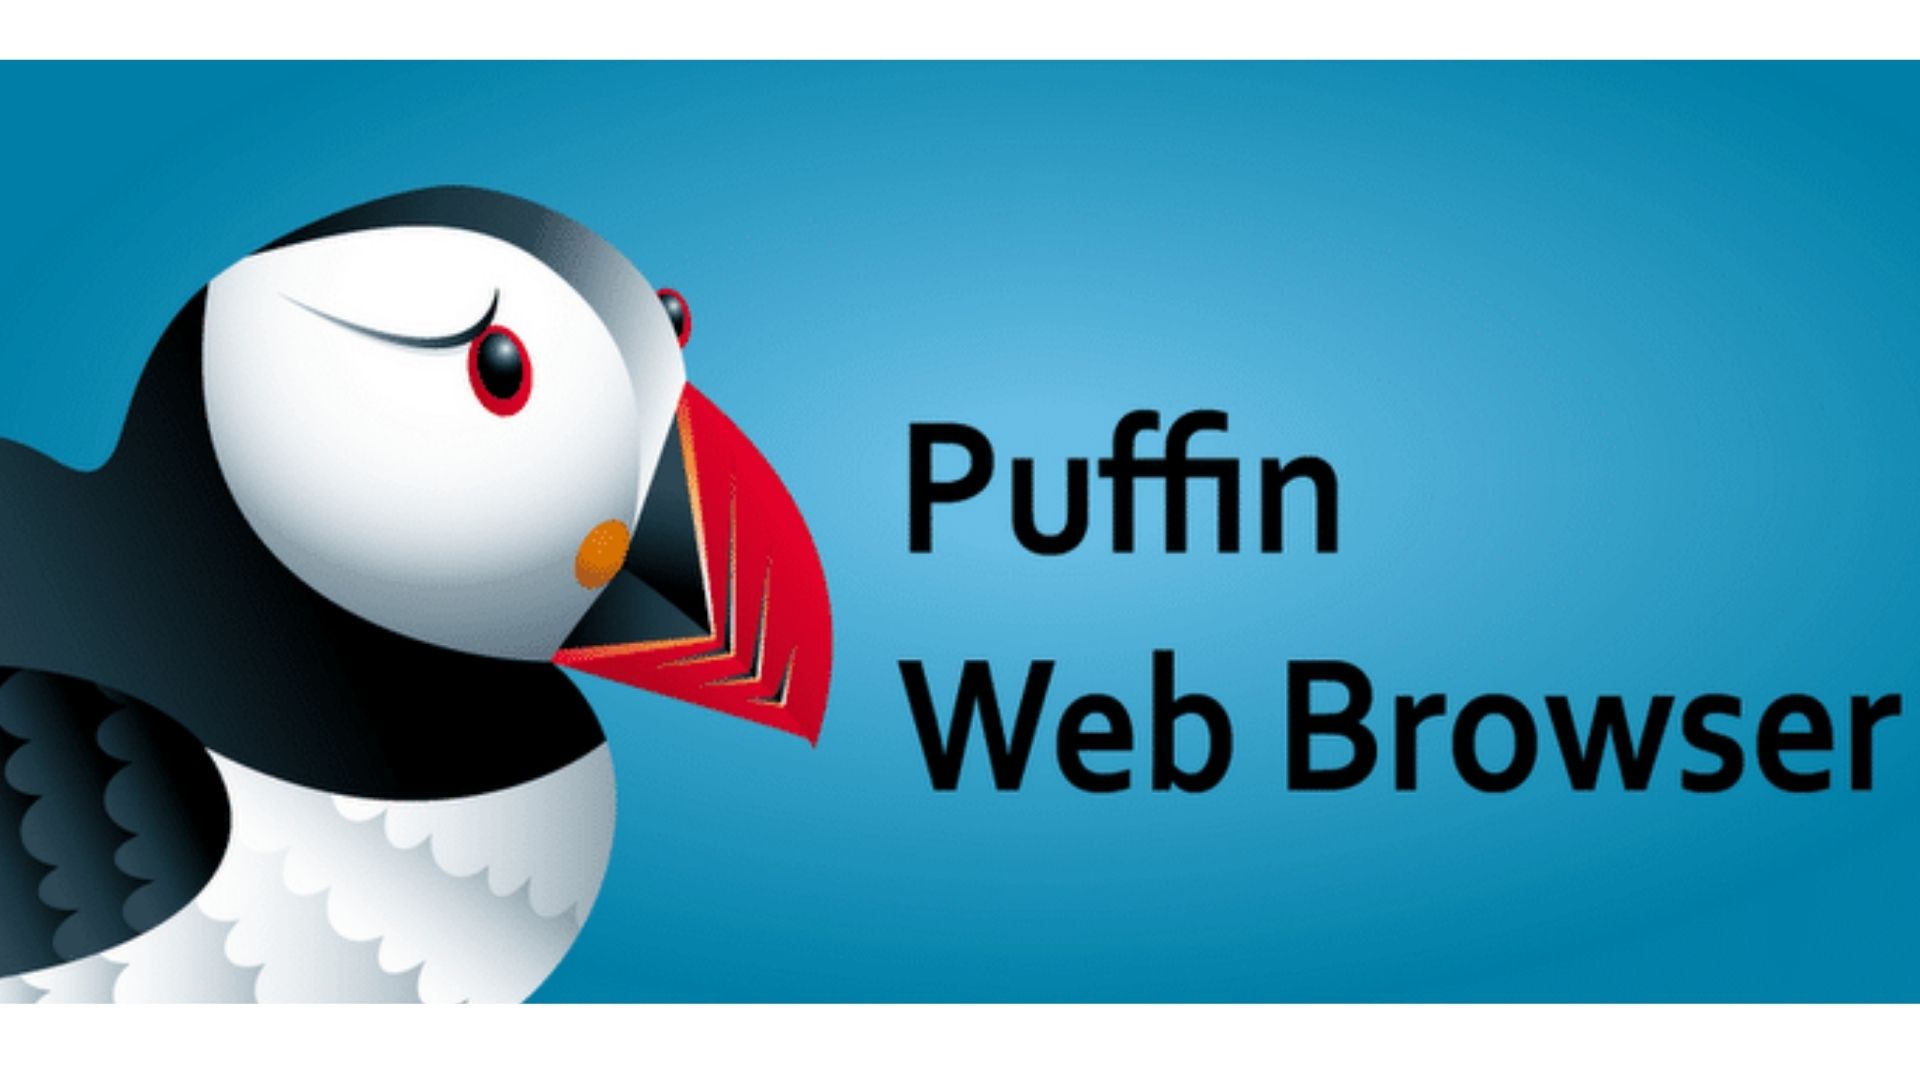 puffin browser for pc windows 10 free download